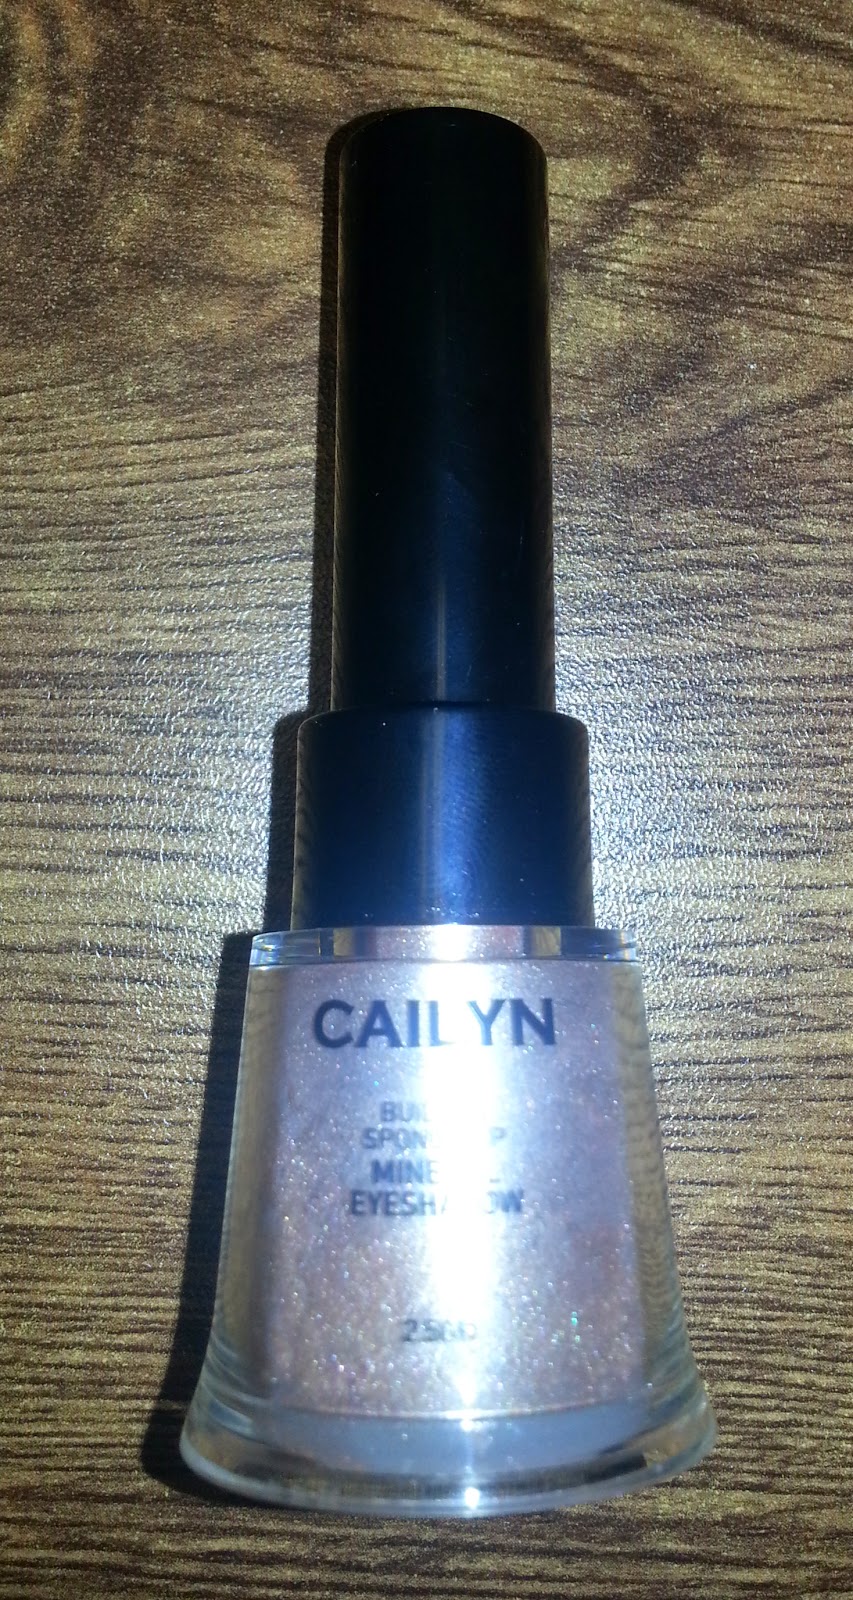 Cailyn Cosmetics Just Mineral Eye Polish in Orchid 